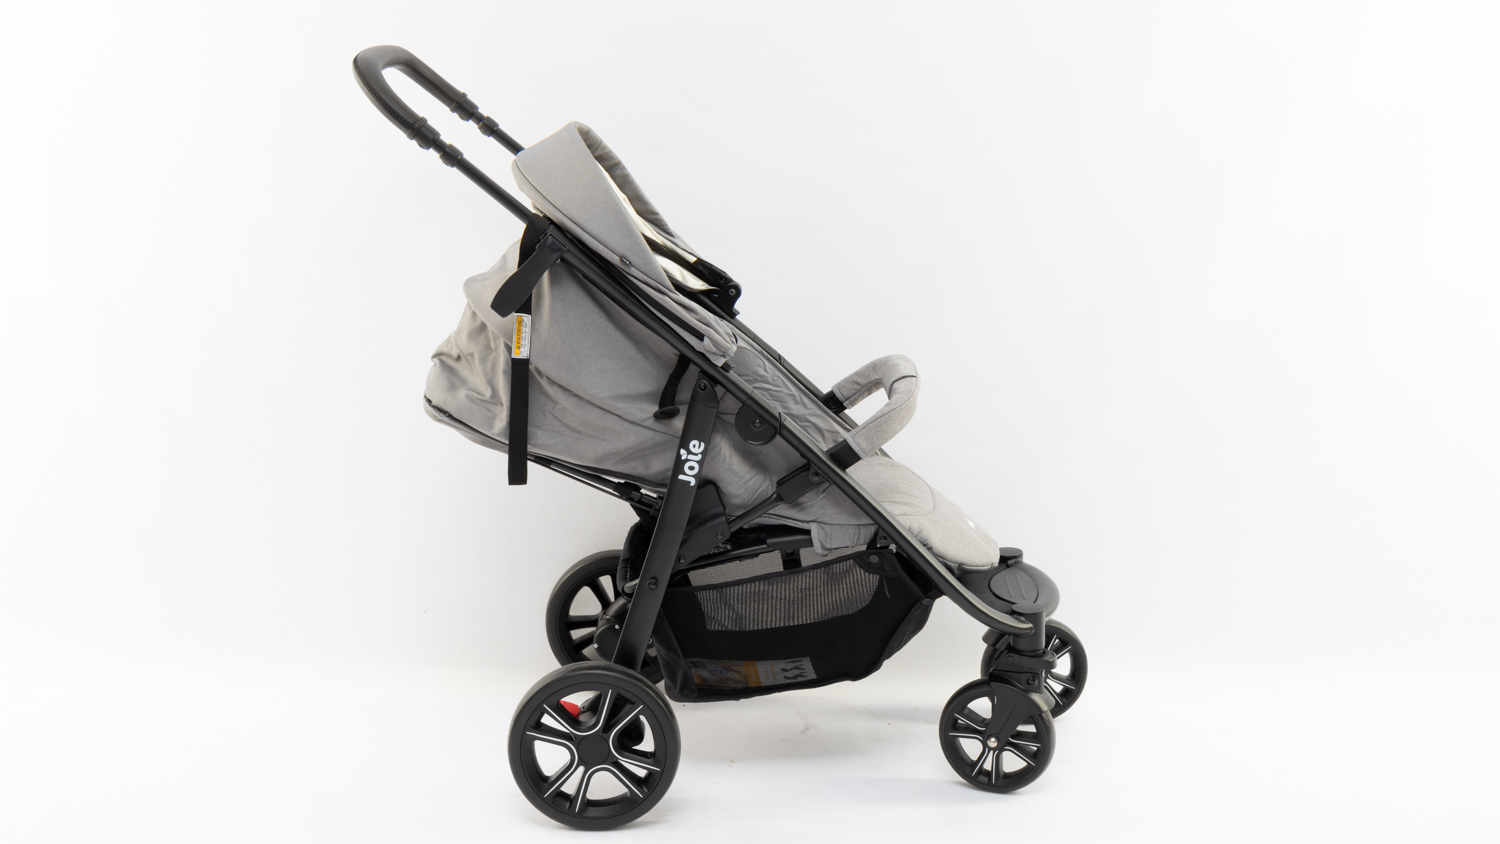 Joie Litetrax 4 DLX Travel System Review | Pram and stroller | CHOICE